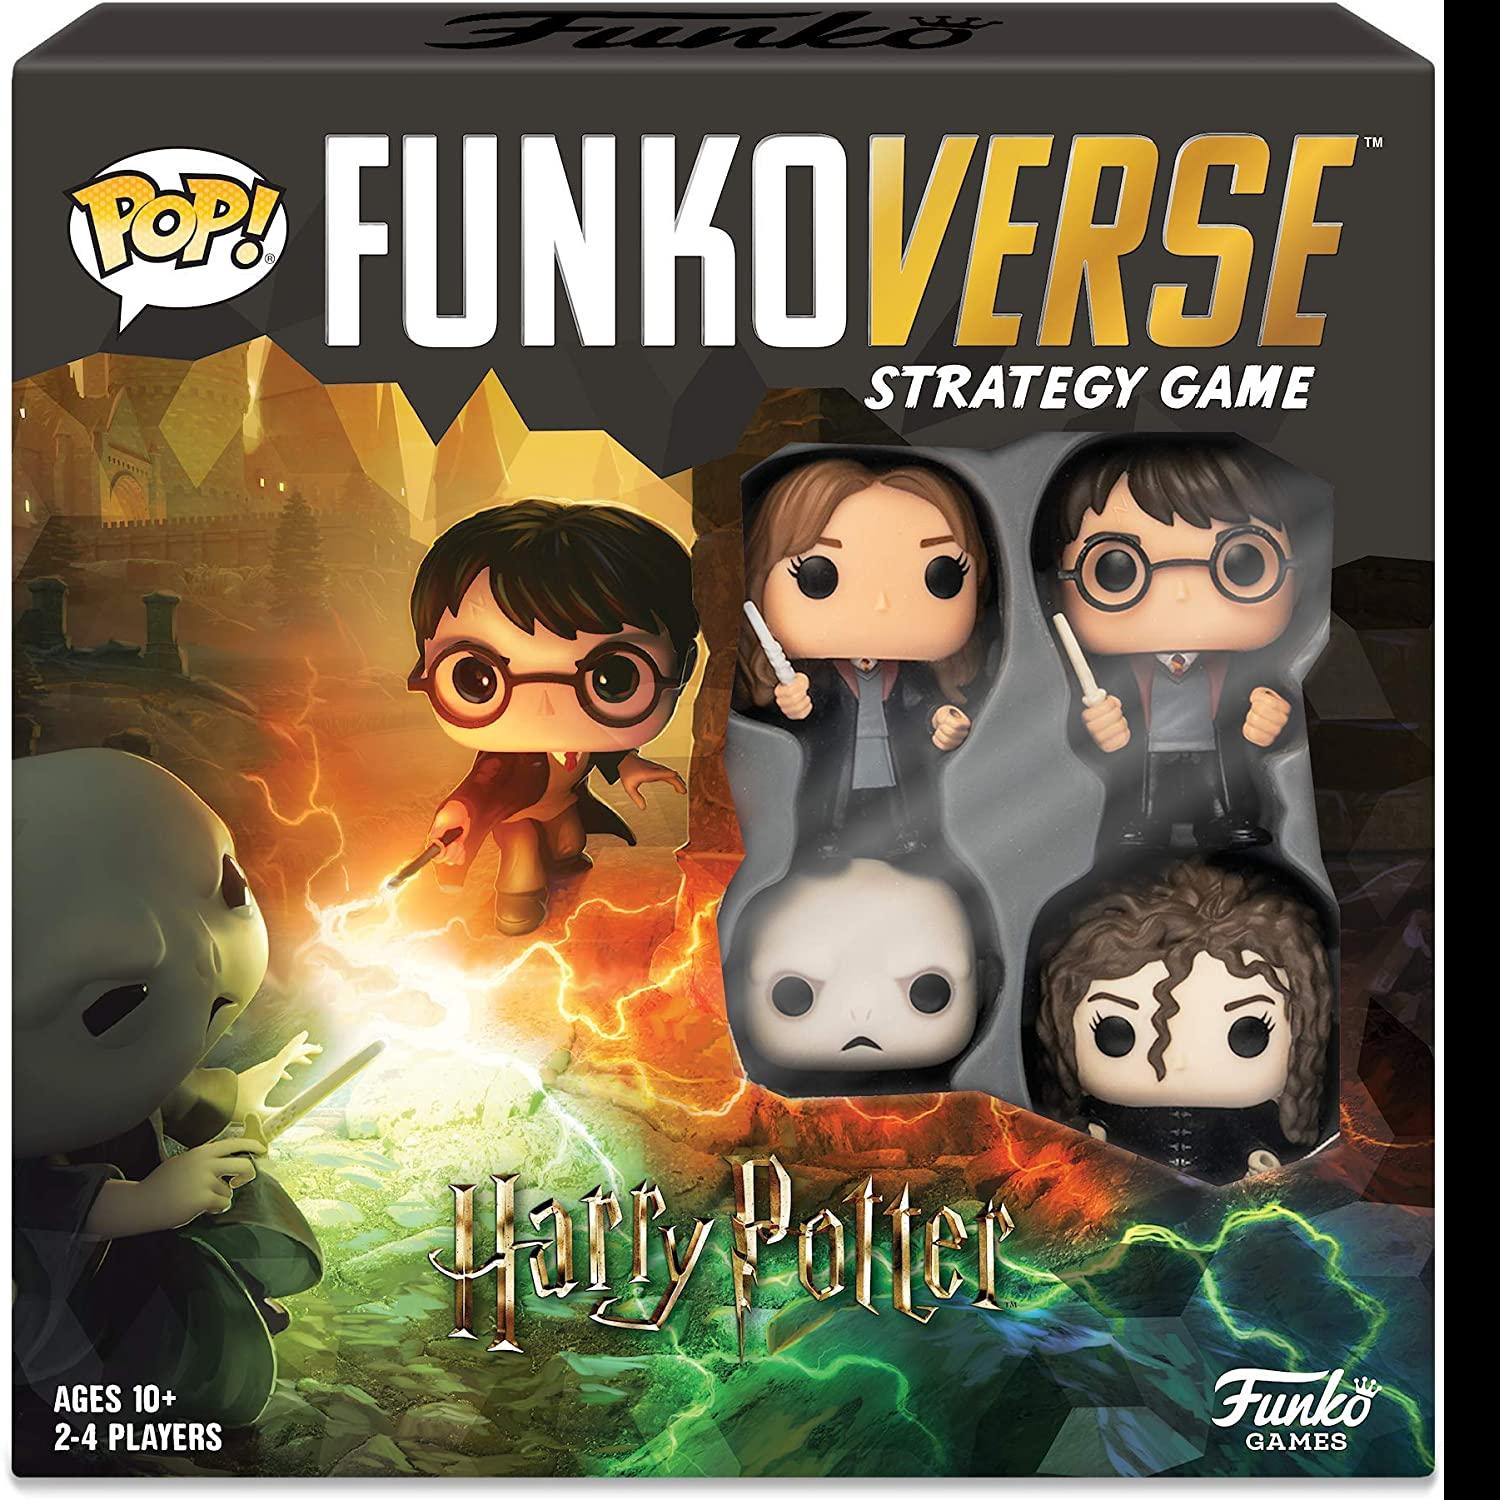 Funko Pop Funkoverse Strategy Game: Harry Potter Base Set for $18.77